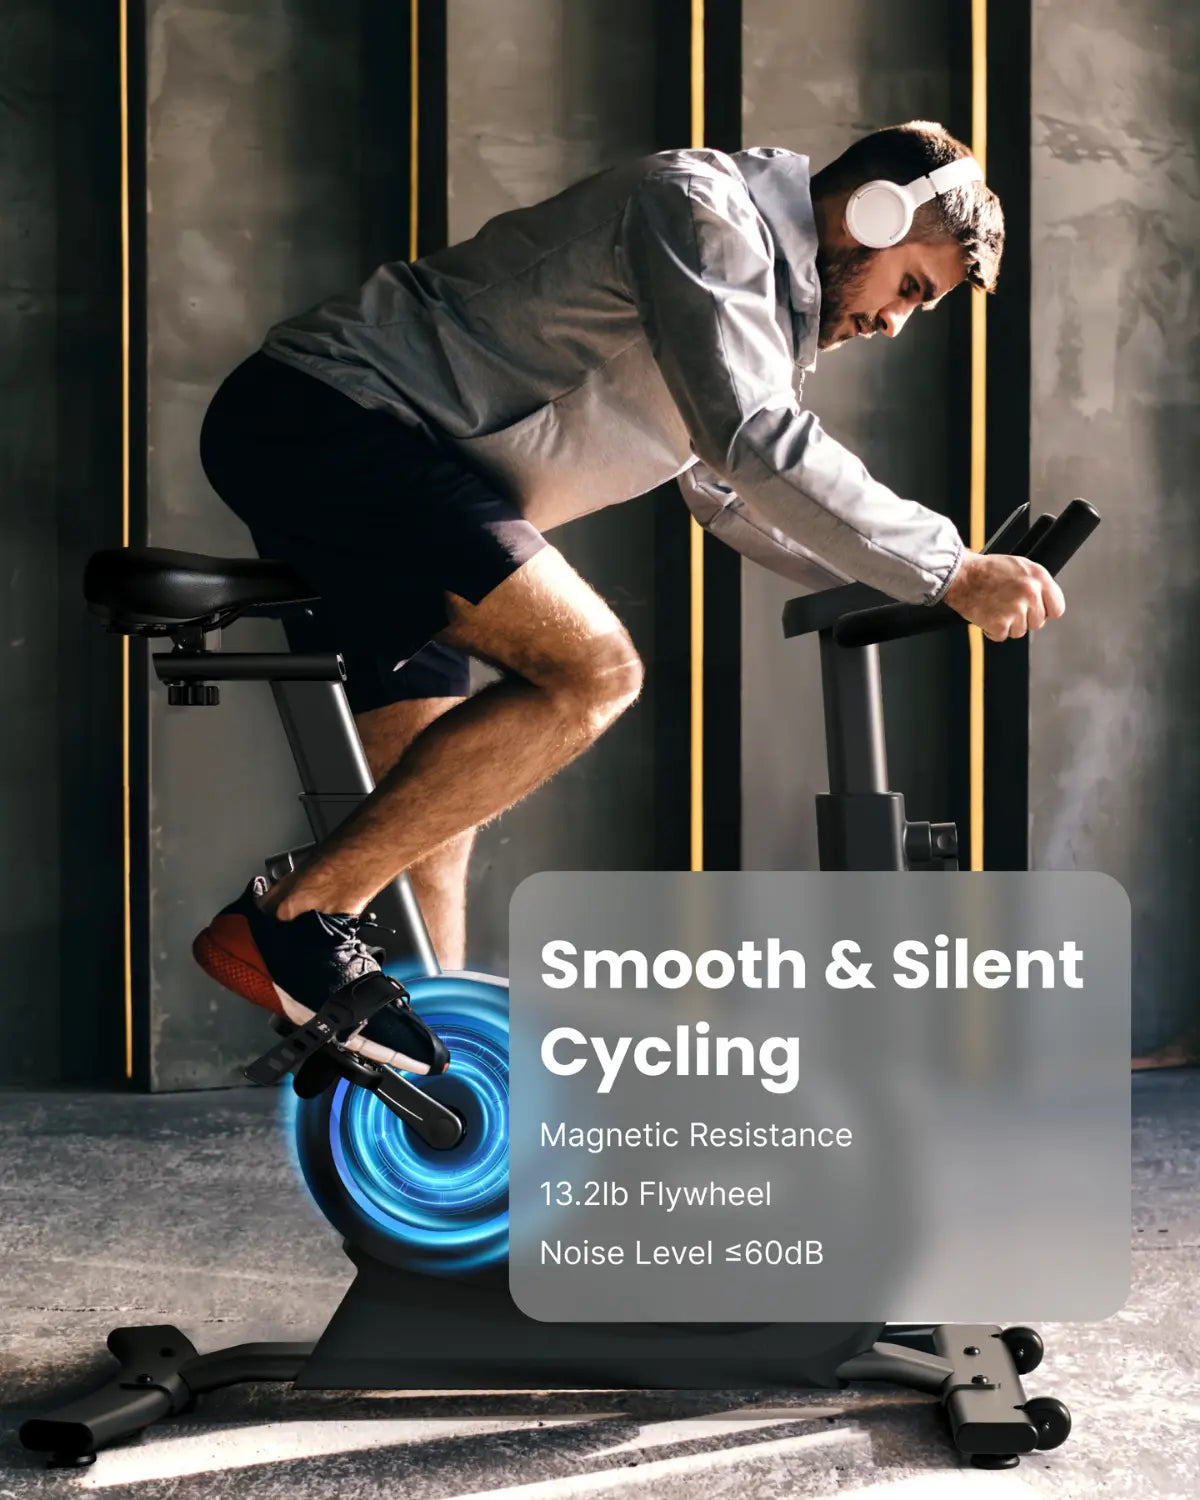 A man wearing a gray hoodie and black shorts rides a Renpho EU AI Smart Bike S indoors. He has white headphones on and is focused on cycling. The AI Smart Bike S features a blue flywheel, offering an immersive fitness experience. Text overlay reads "Smooth & Silent Cycling", "Magnetic Resistance 13.2lb Flywheel", and "Noise Level ≤60dB".